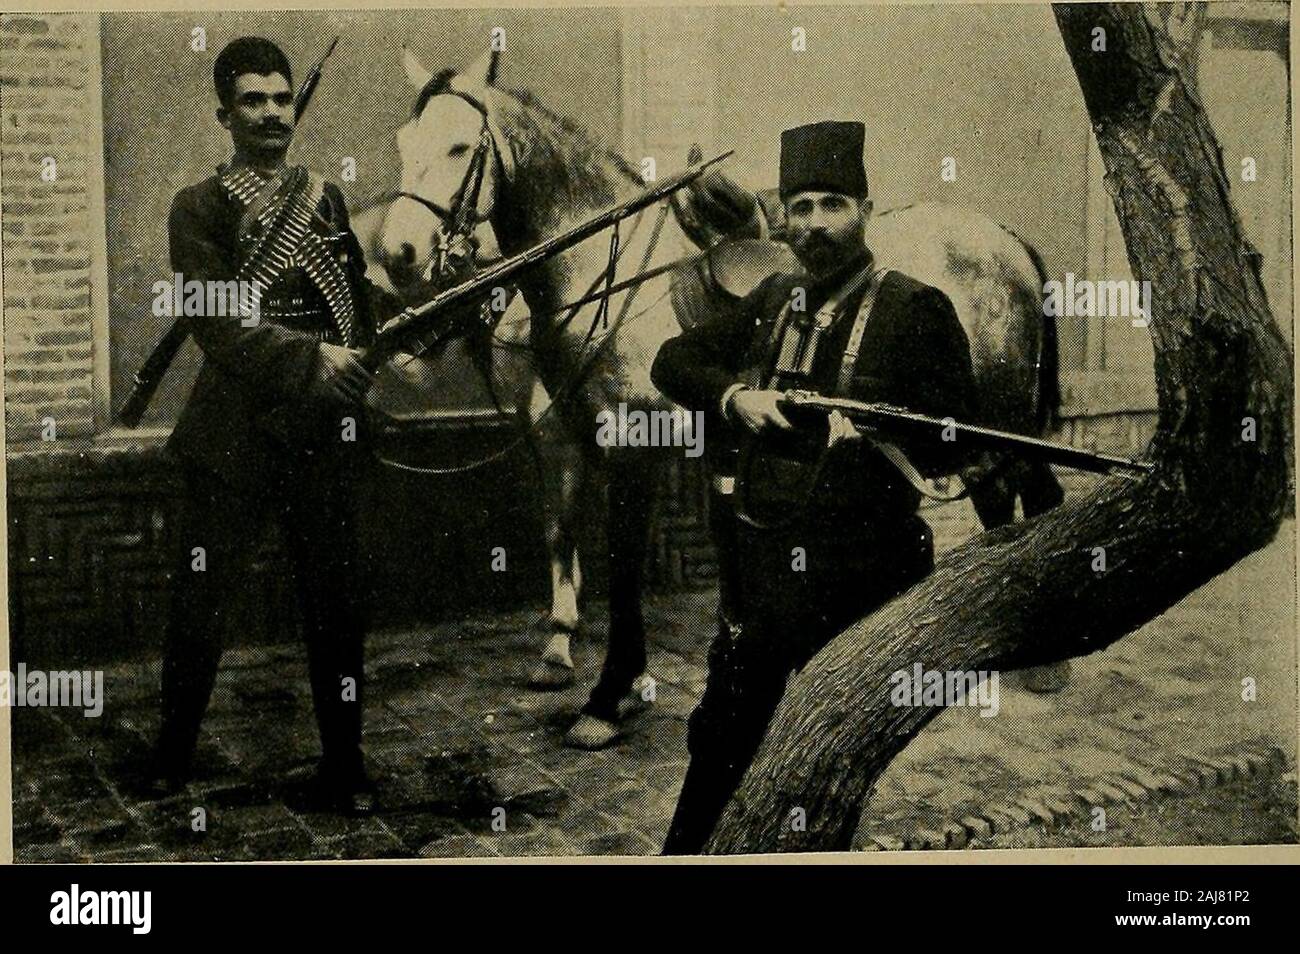 The strangling of Persia; a story of the European diplomacy and oriental intrigue that resulted in the denationalization of twelve million Mohammedans, a personal narrative . FPHRIM KHAN (WITH FUR-COLLARED OVERCOAT), AMIR MUJAHID (LEANING^^ ON CANE) AND MR. SHUSTER. Inspecting the Nationalist forces about to be dispatched against Muhammad Ali.. EPHRAIM KHAN. With his private bodyguard and favorite horse. THE DIPLOMATIC FIELD IN 1911 257 A railway will be constructed by German concessionaires fromBagad to Khanikin, on the Persian frontier, to connect the Bag-dad line with the Russo-German line Stock Photo